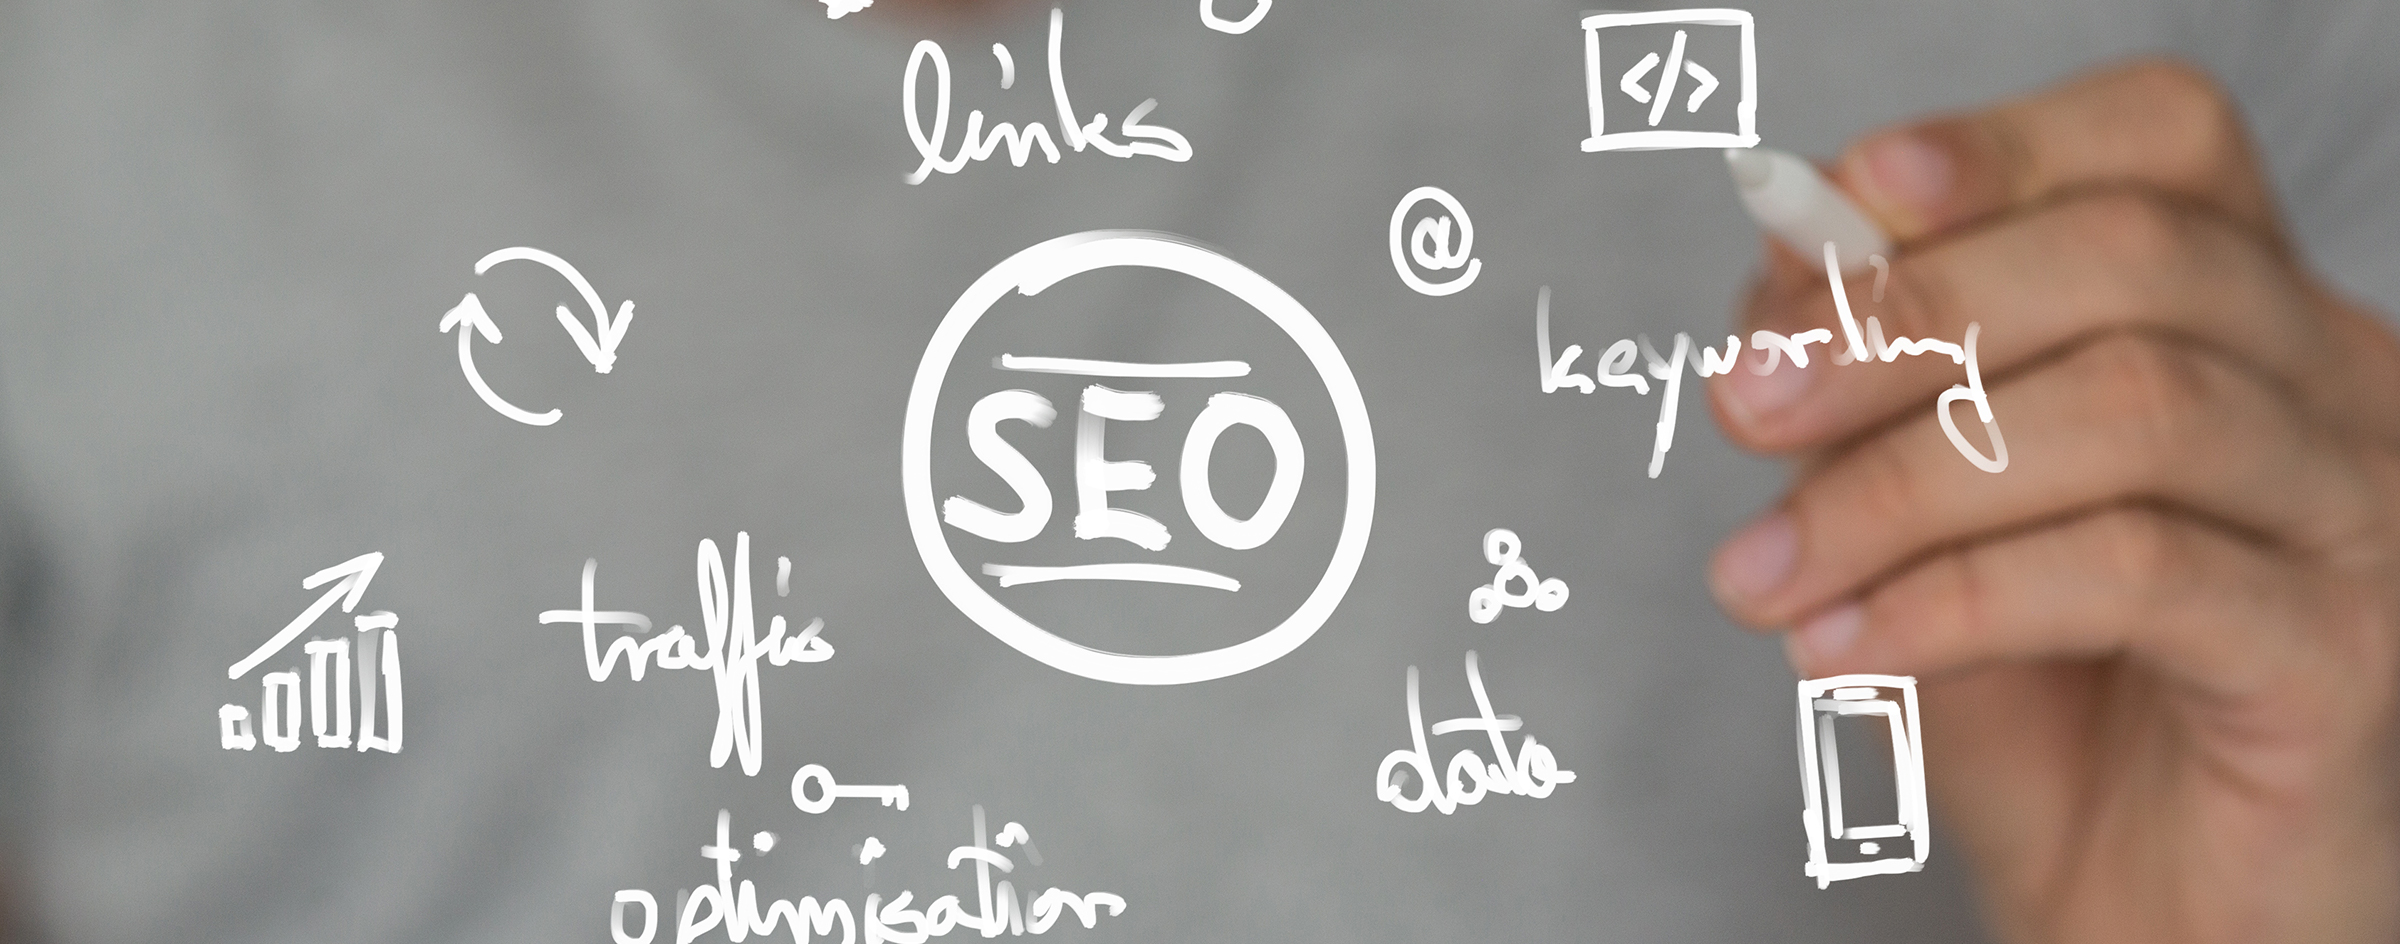 why invest in seo